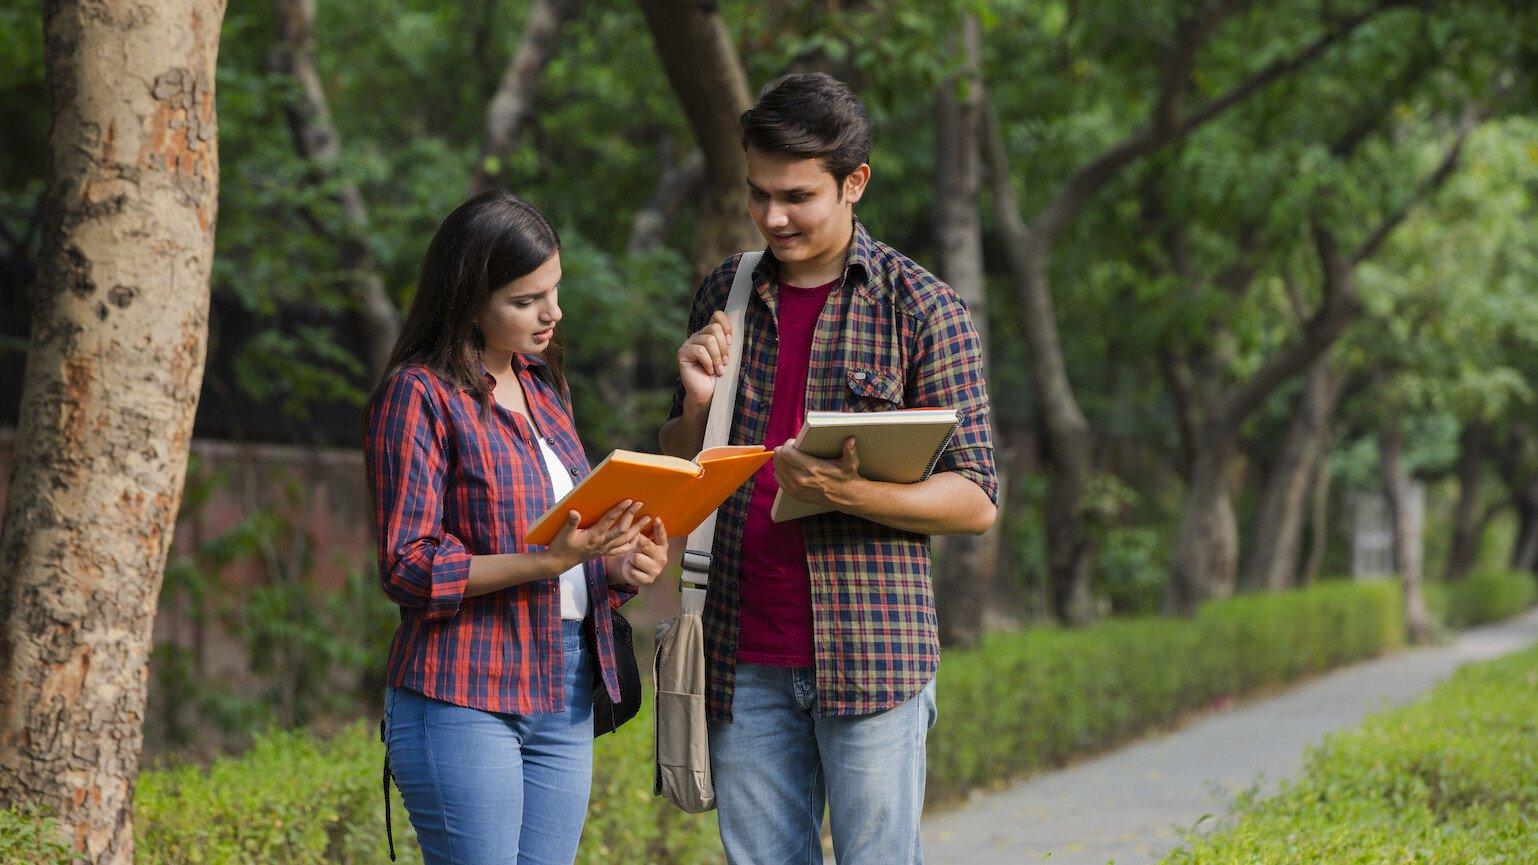 Two students talking to each other and looking at a book. They are stood outdoors on a path lined by trees.